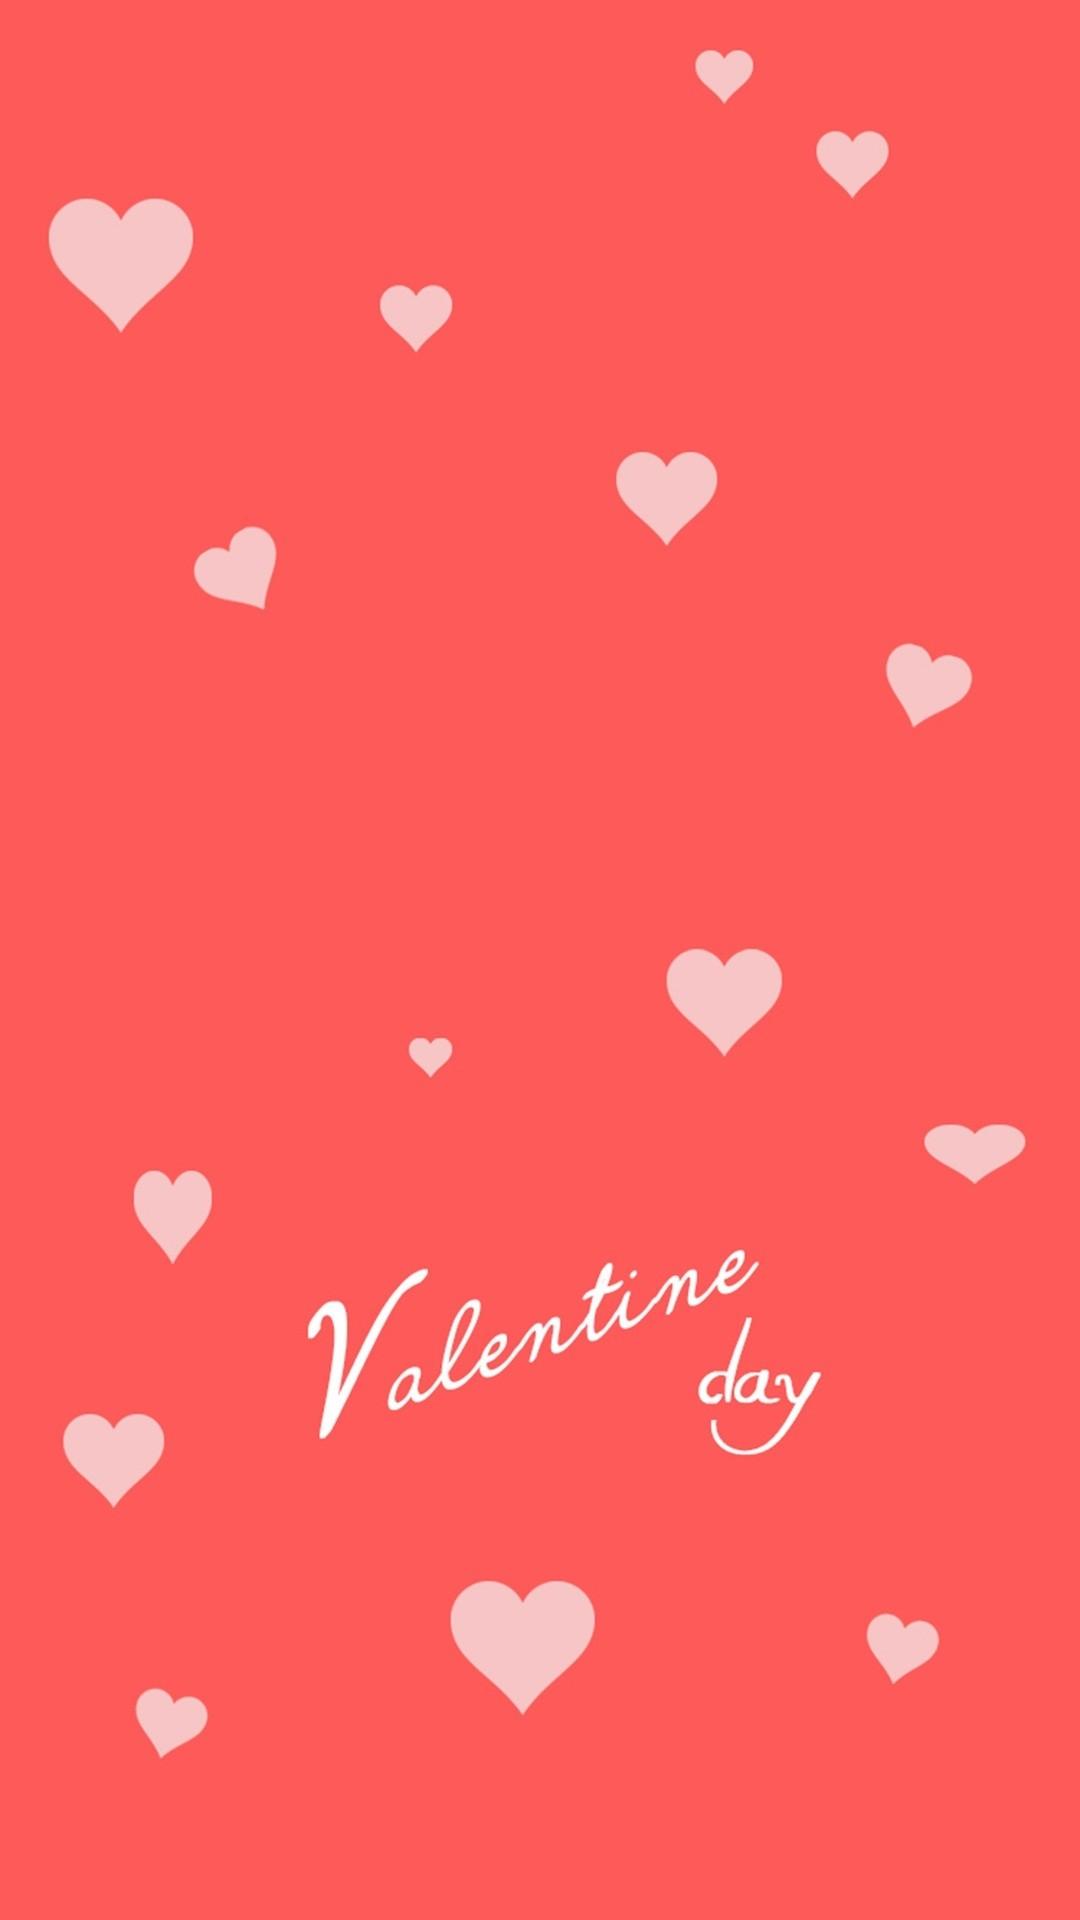 Valentines Day Android Wallpaper